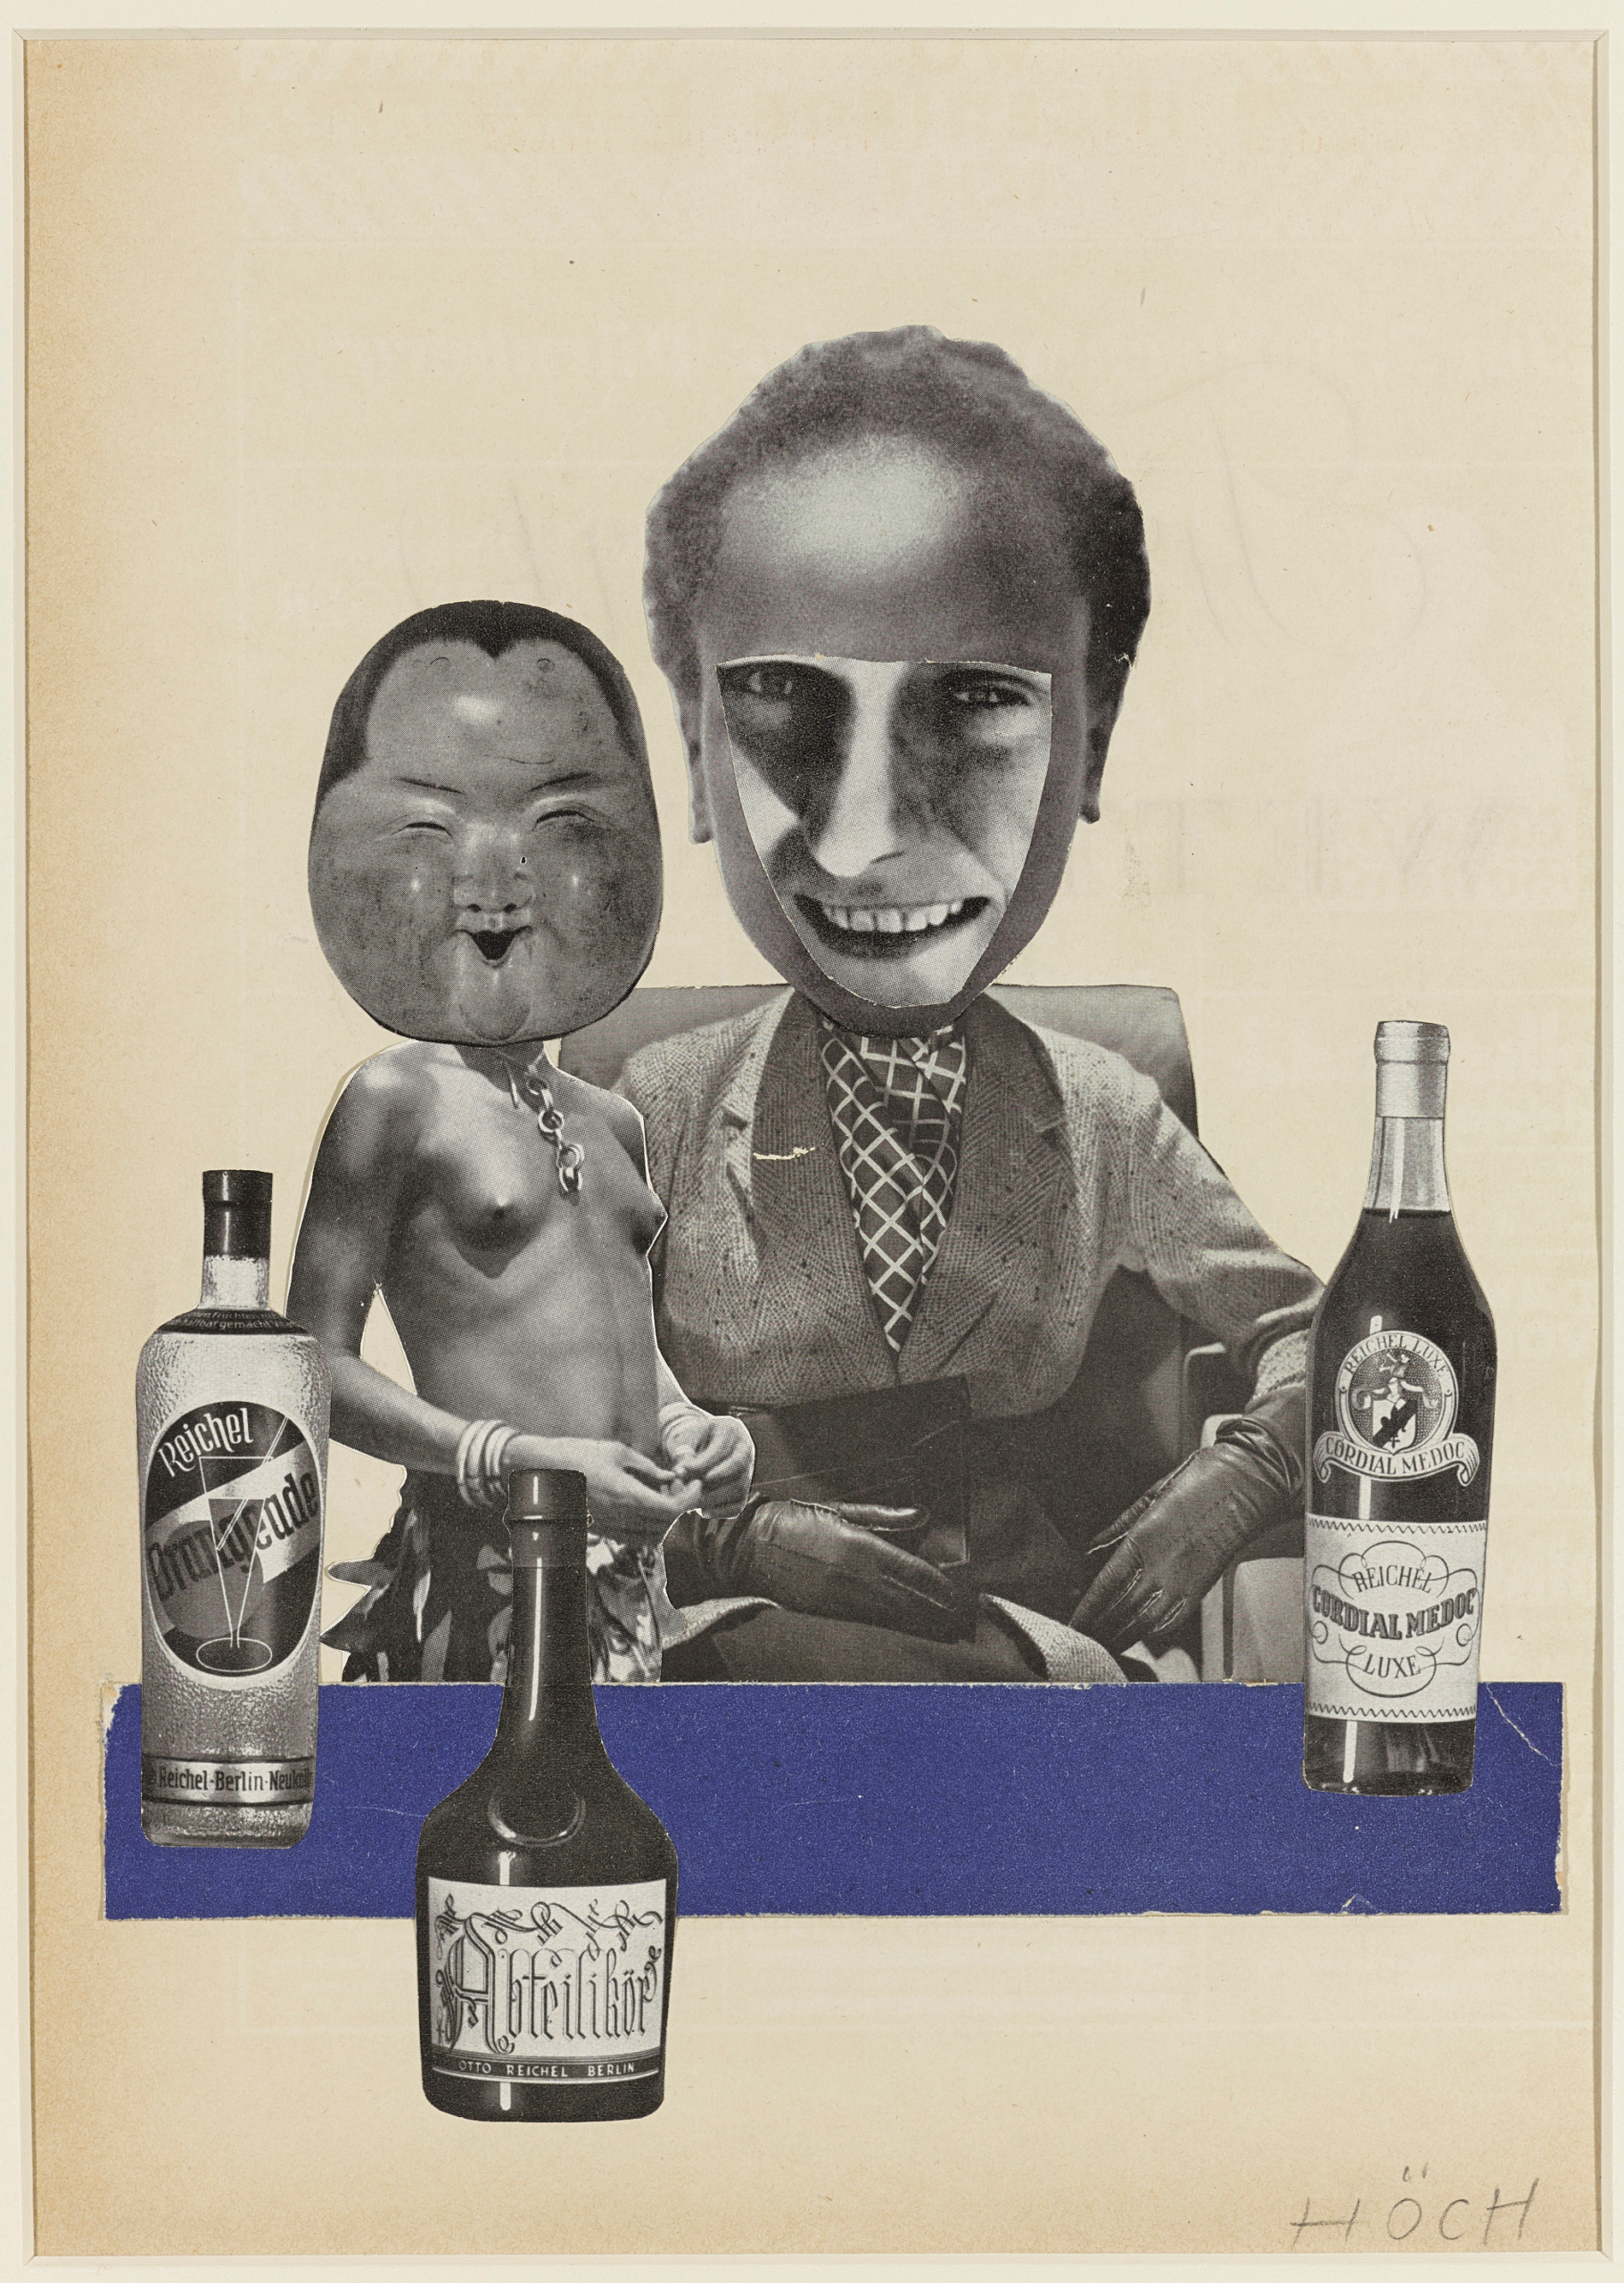     Hannah Höch, Untitled (African Torso with Japanese Mask), 1930. Photomontage, 28 x 20.5 cm. Purchase, 2012. © Estate of Hannah Höch / SOCAN (2019) 2012/4. AGO.110151.d

